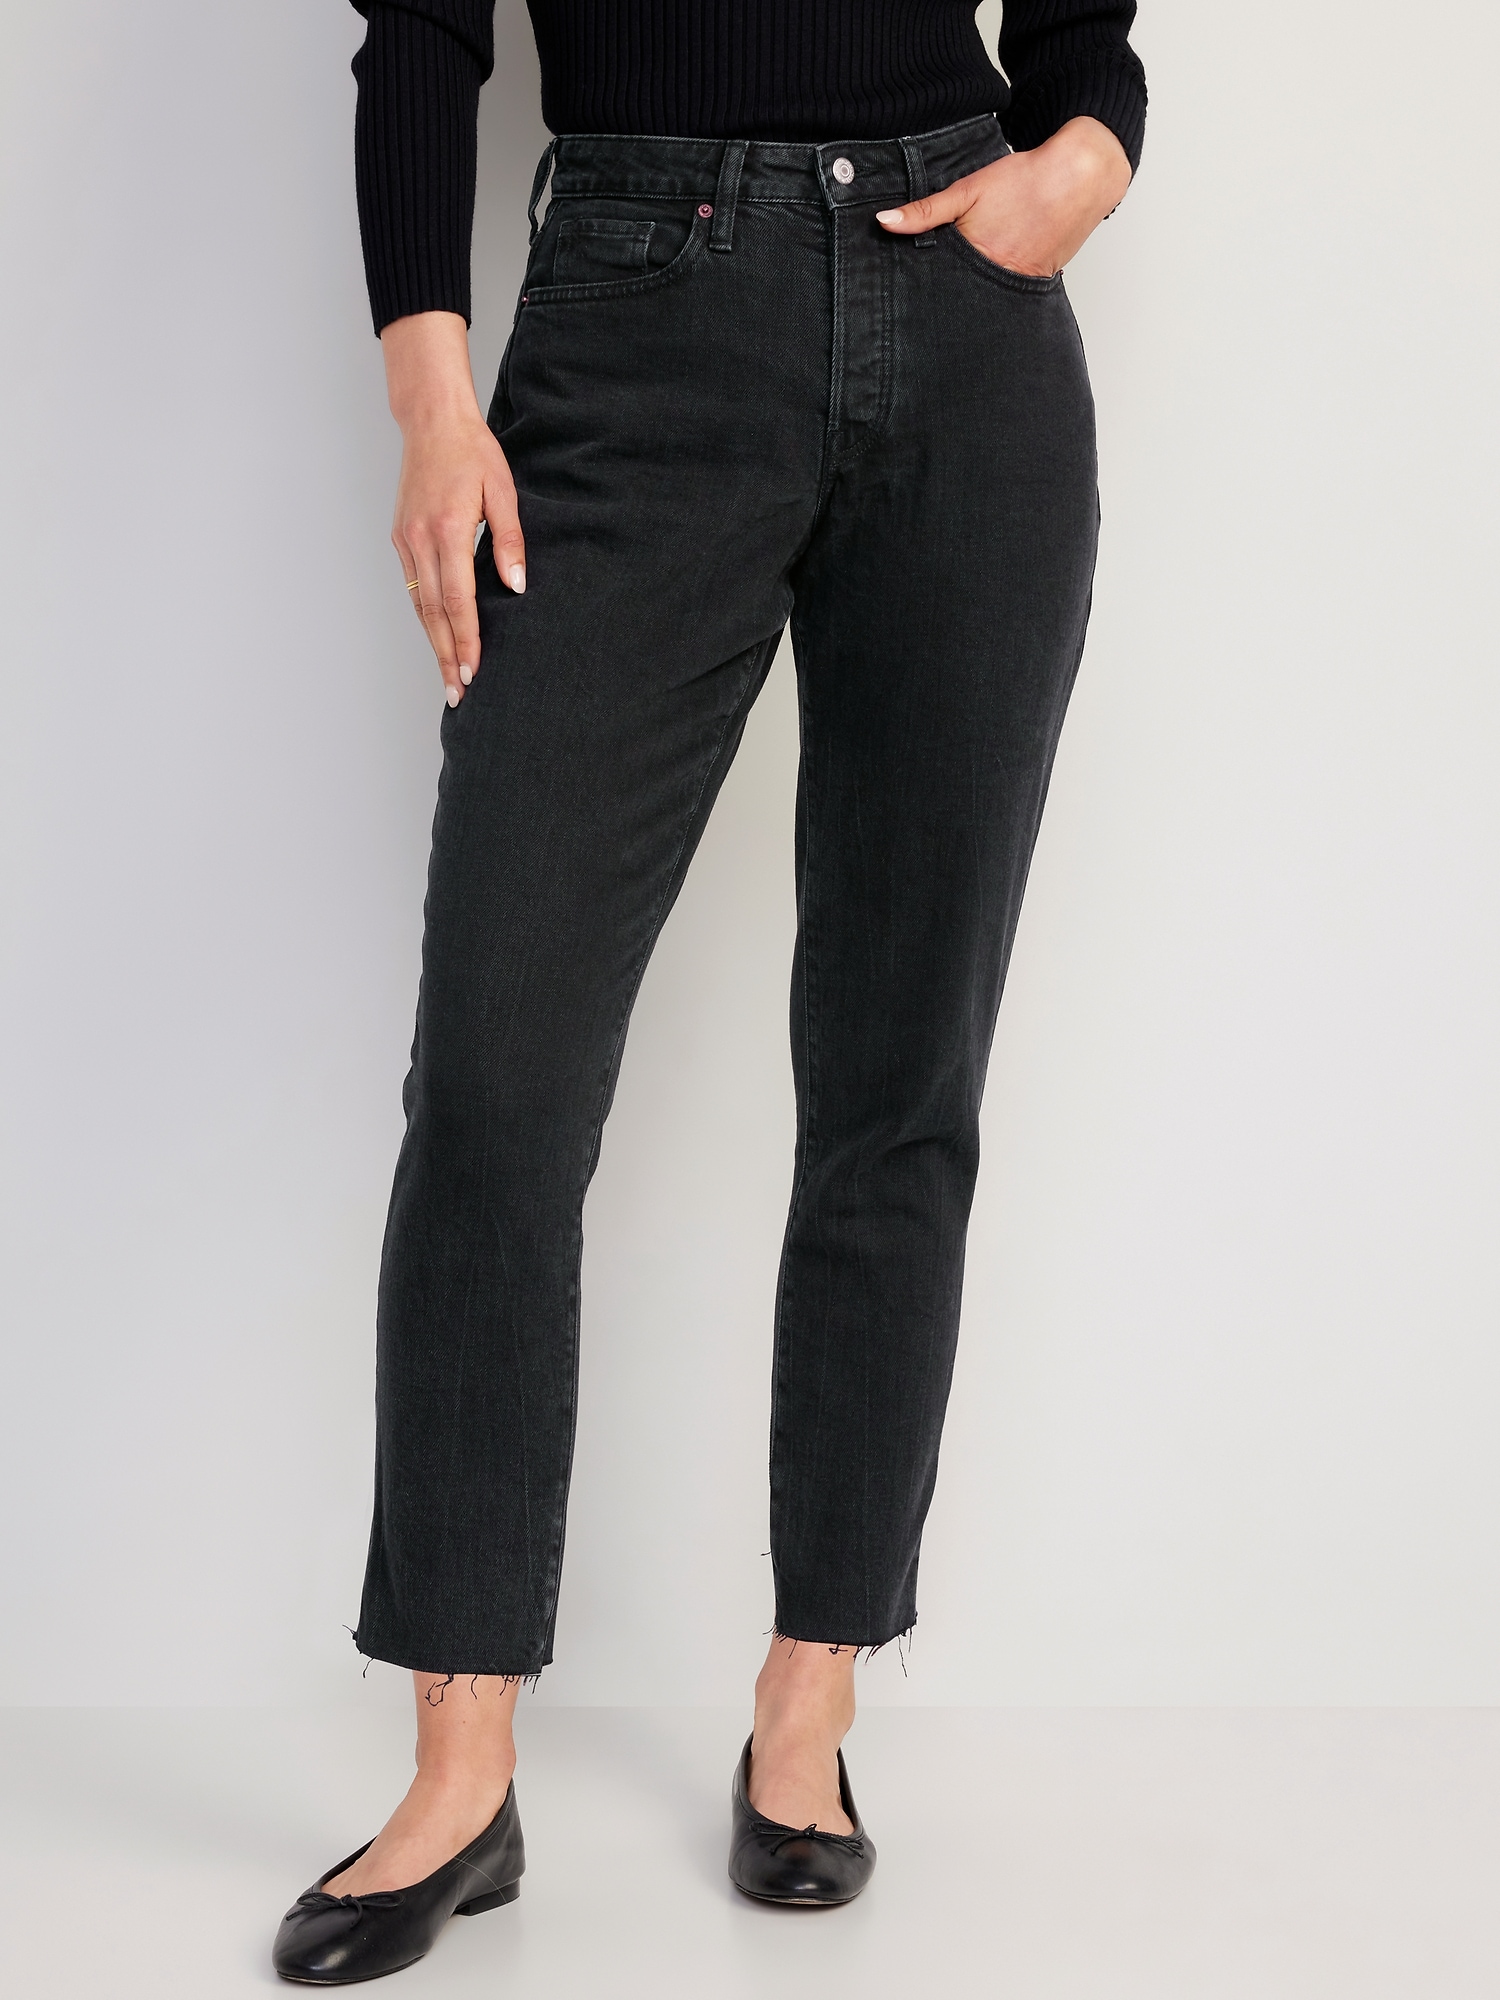 Sexy JEANS Size 18 Womens Plus SKINNY Hi Rise BUTTON FLY Black STRETCH